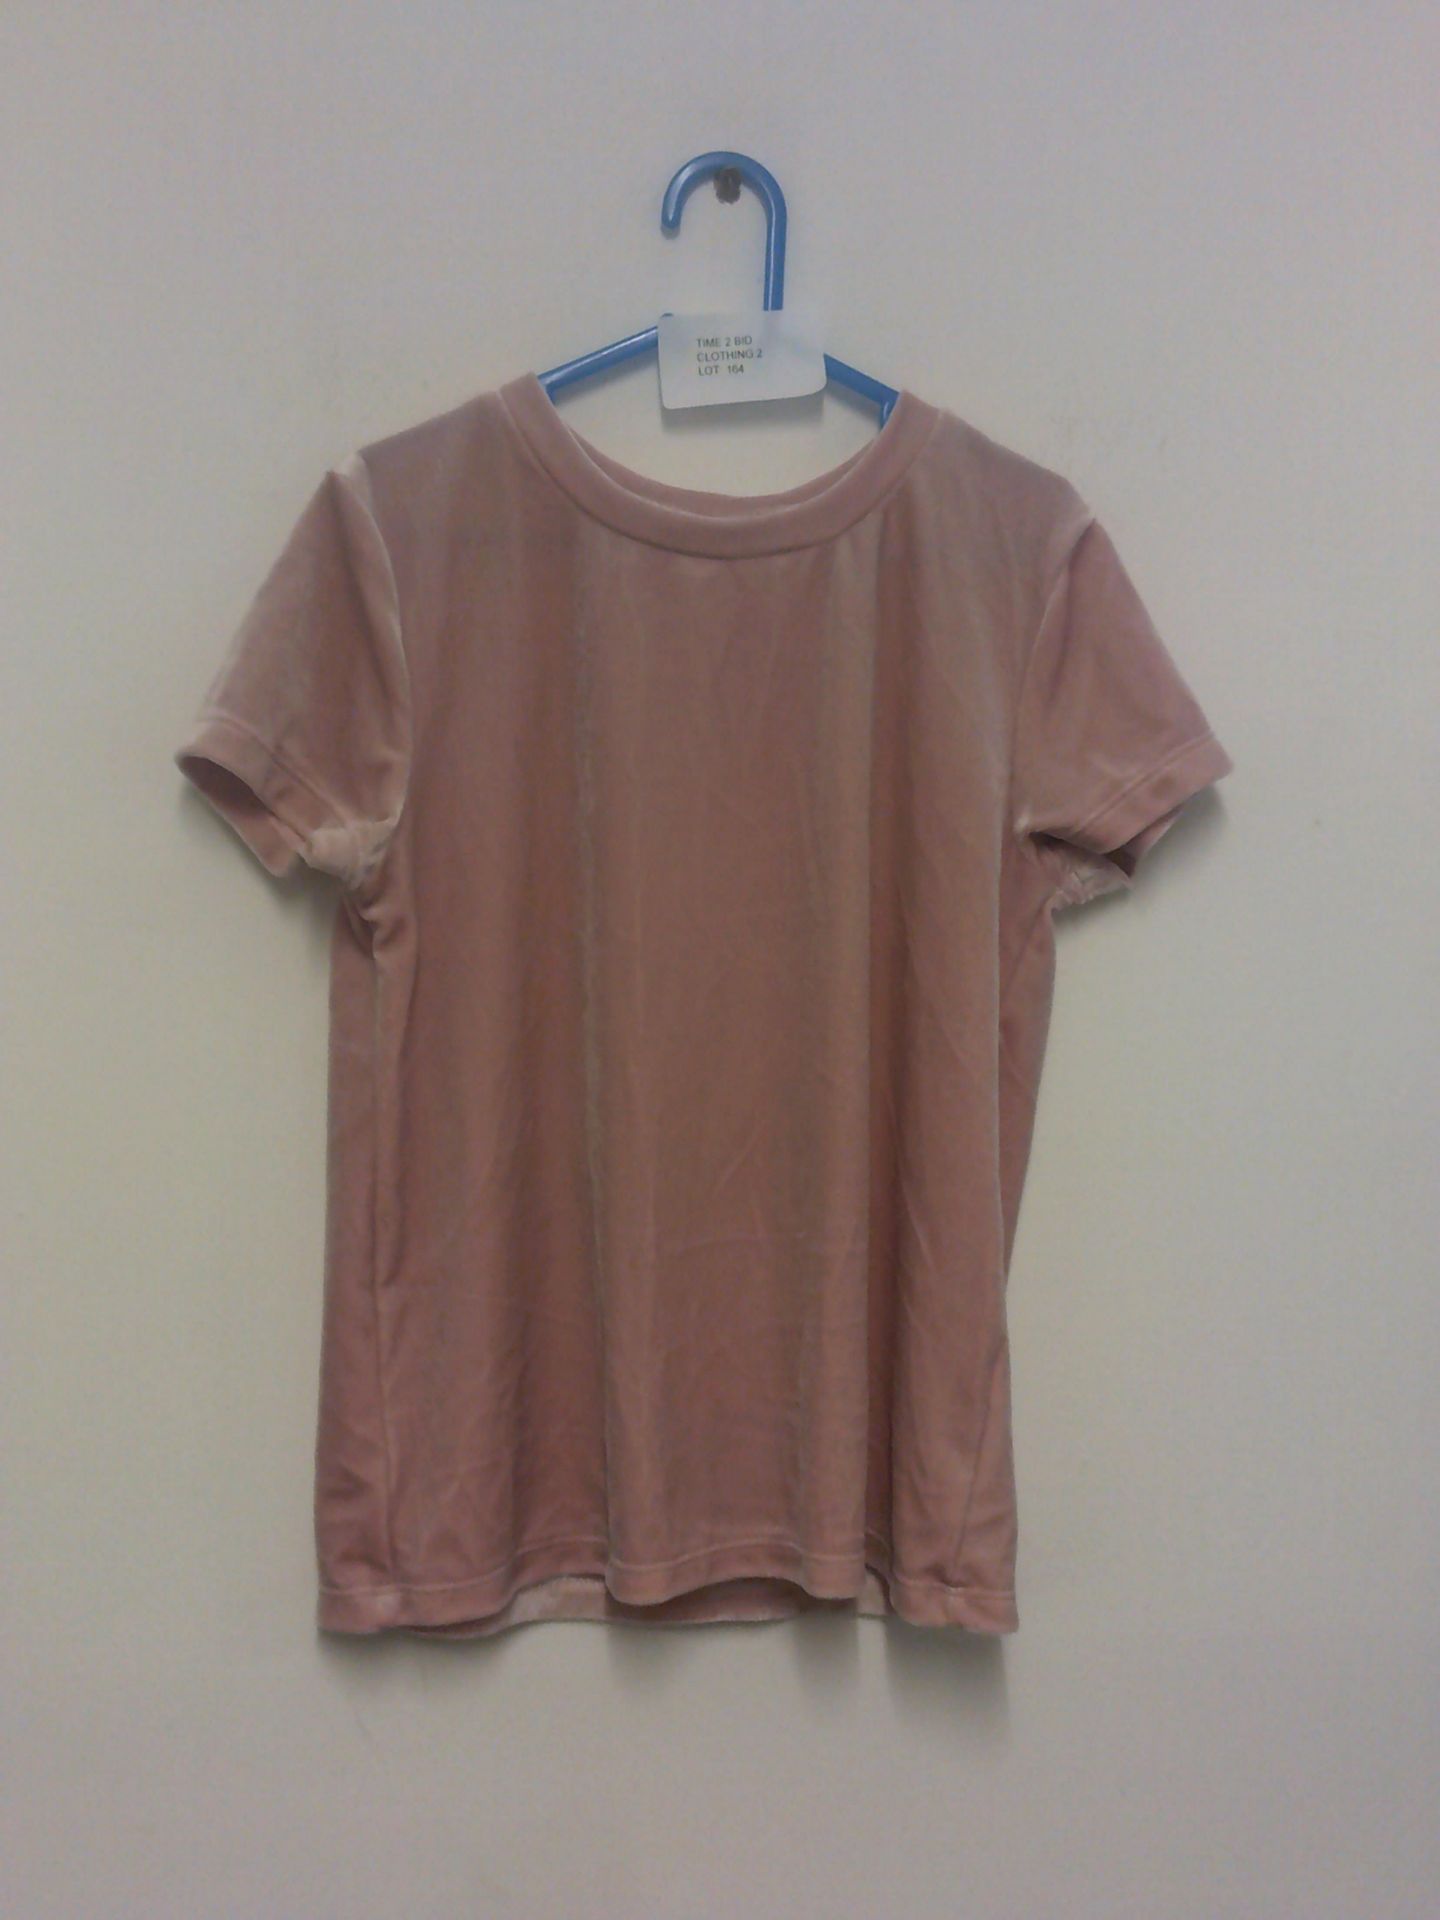 GIRLS VELOUR PINK SPARKLE STAR TOP AGE 8YRS